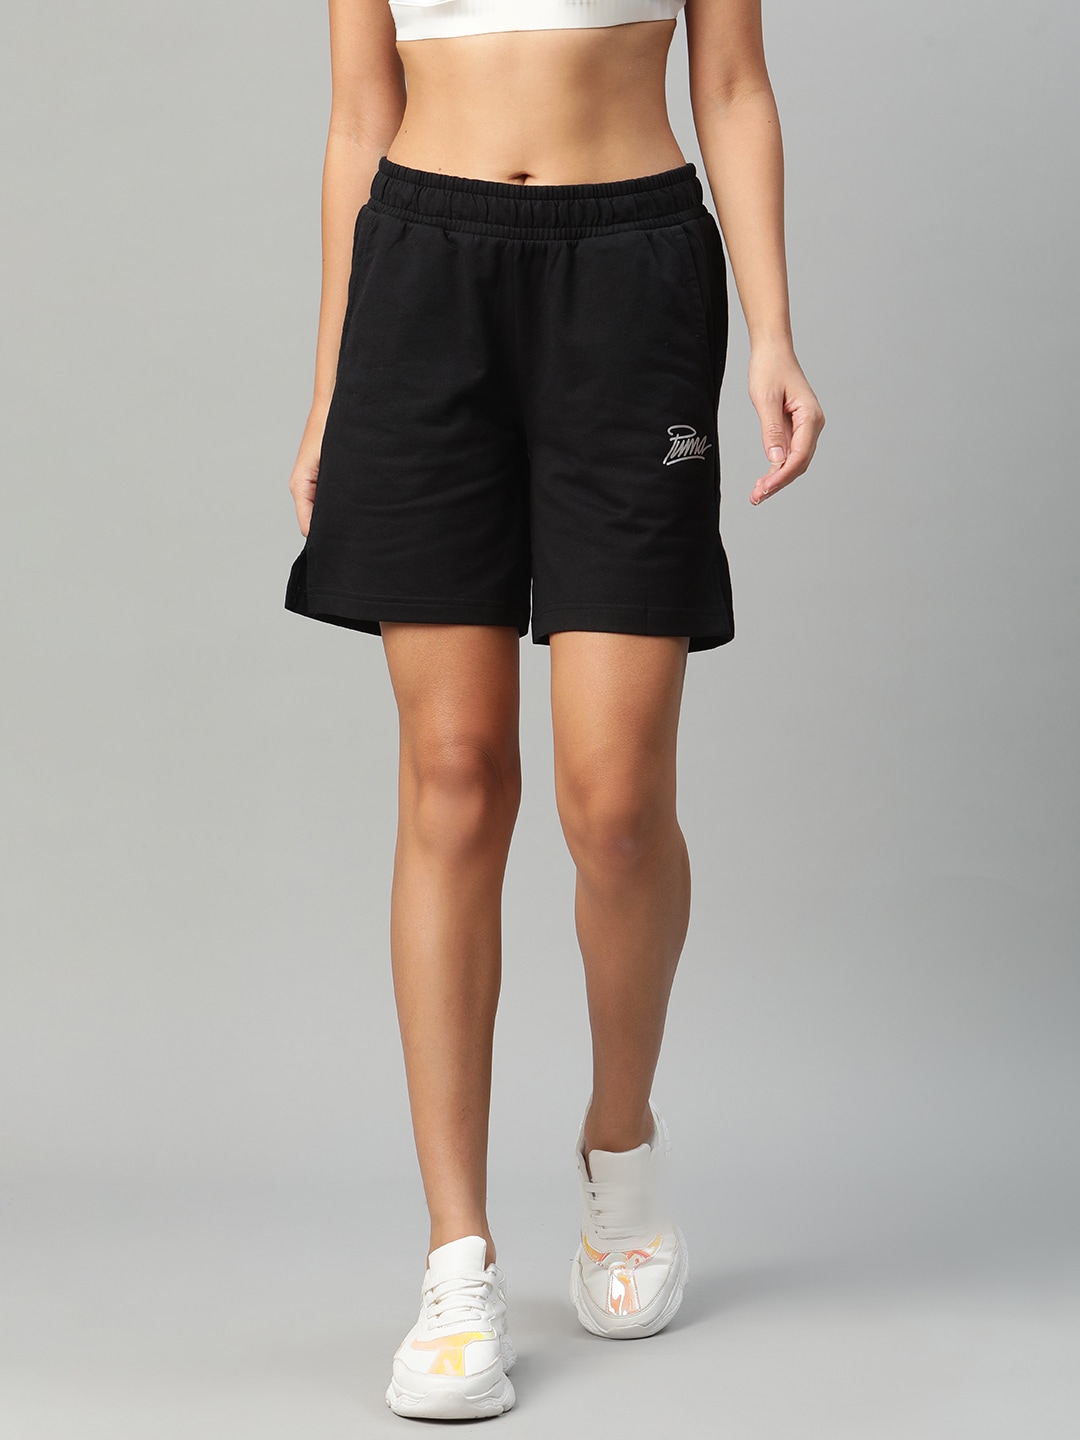 Puma Women Black Graphic 4 Solid Regular Fit Sports Shorts Price in India